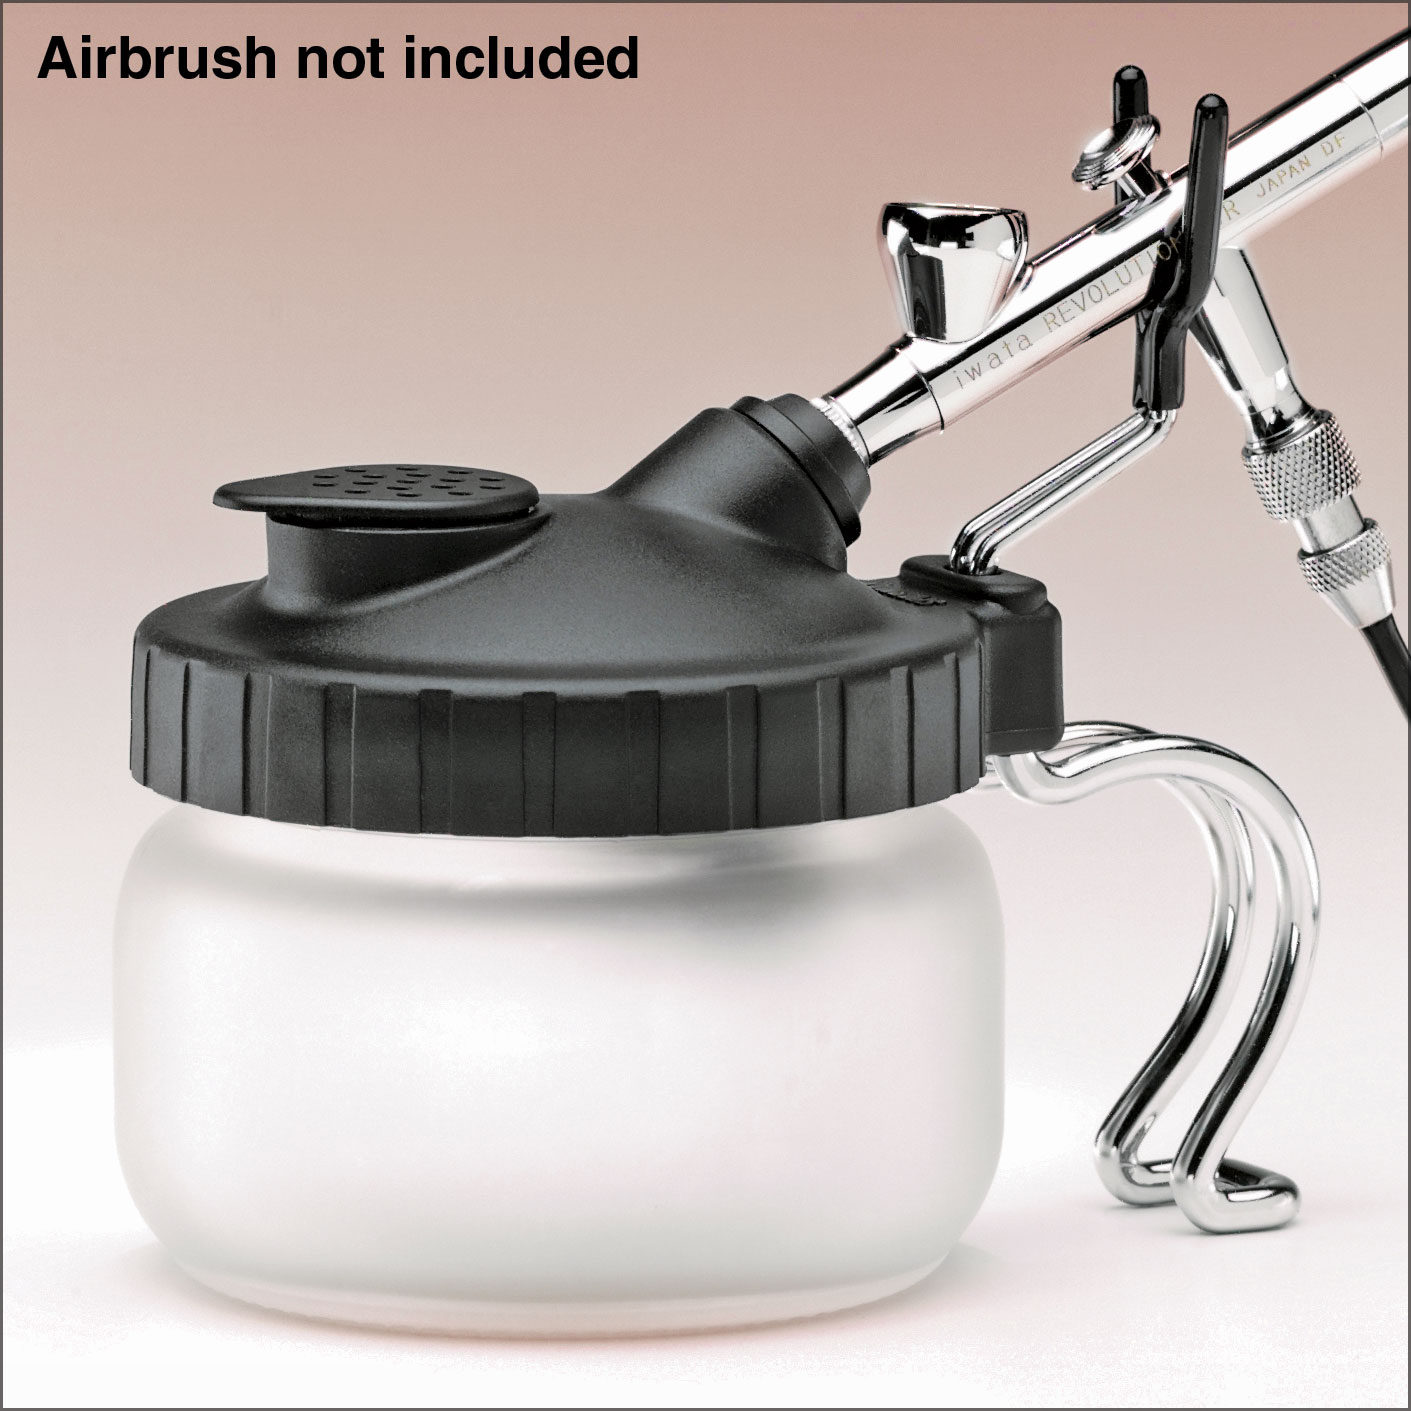 AIRBRUSH CLEANING STATION